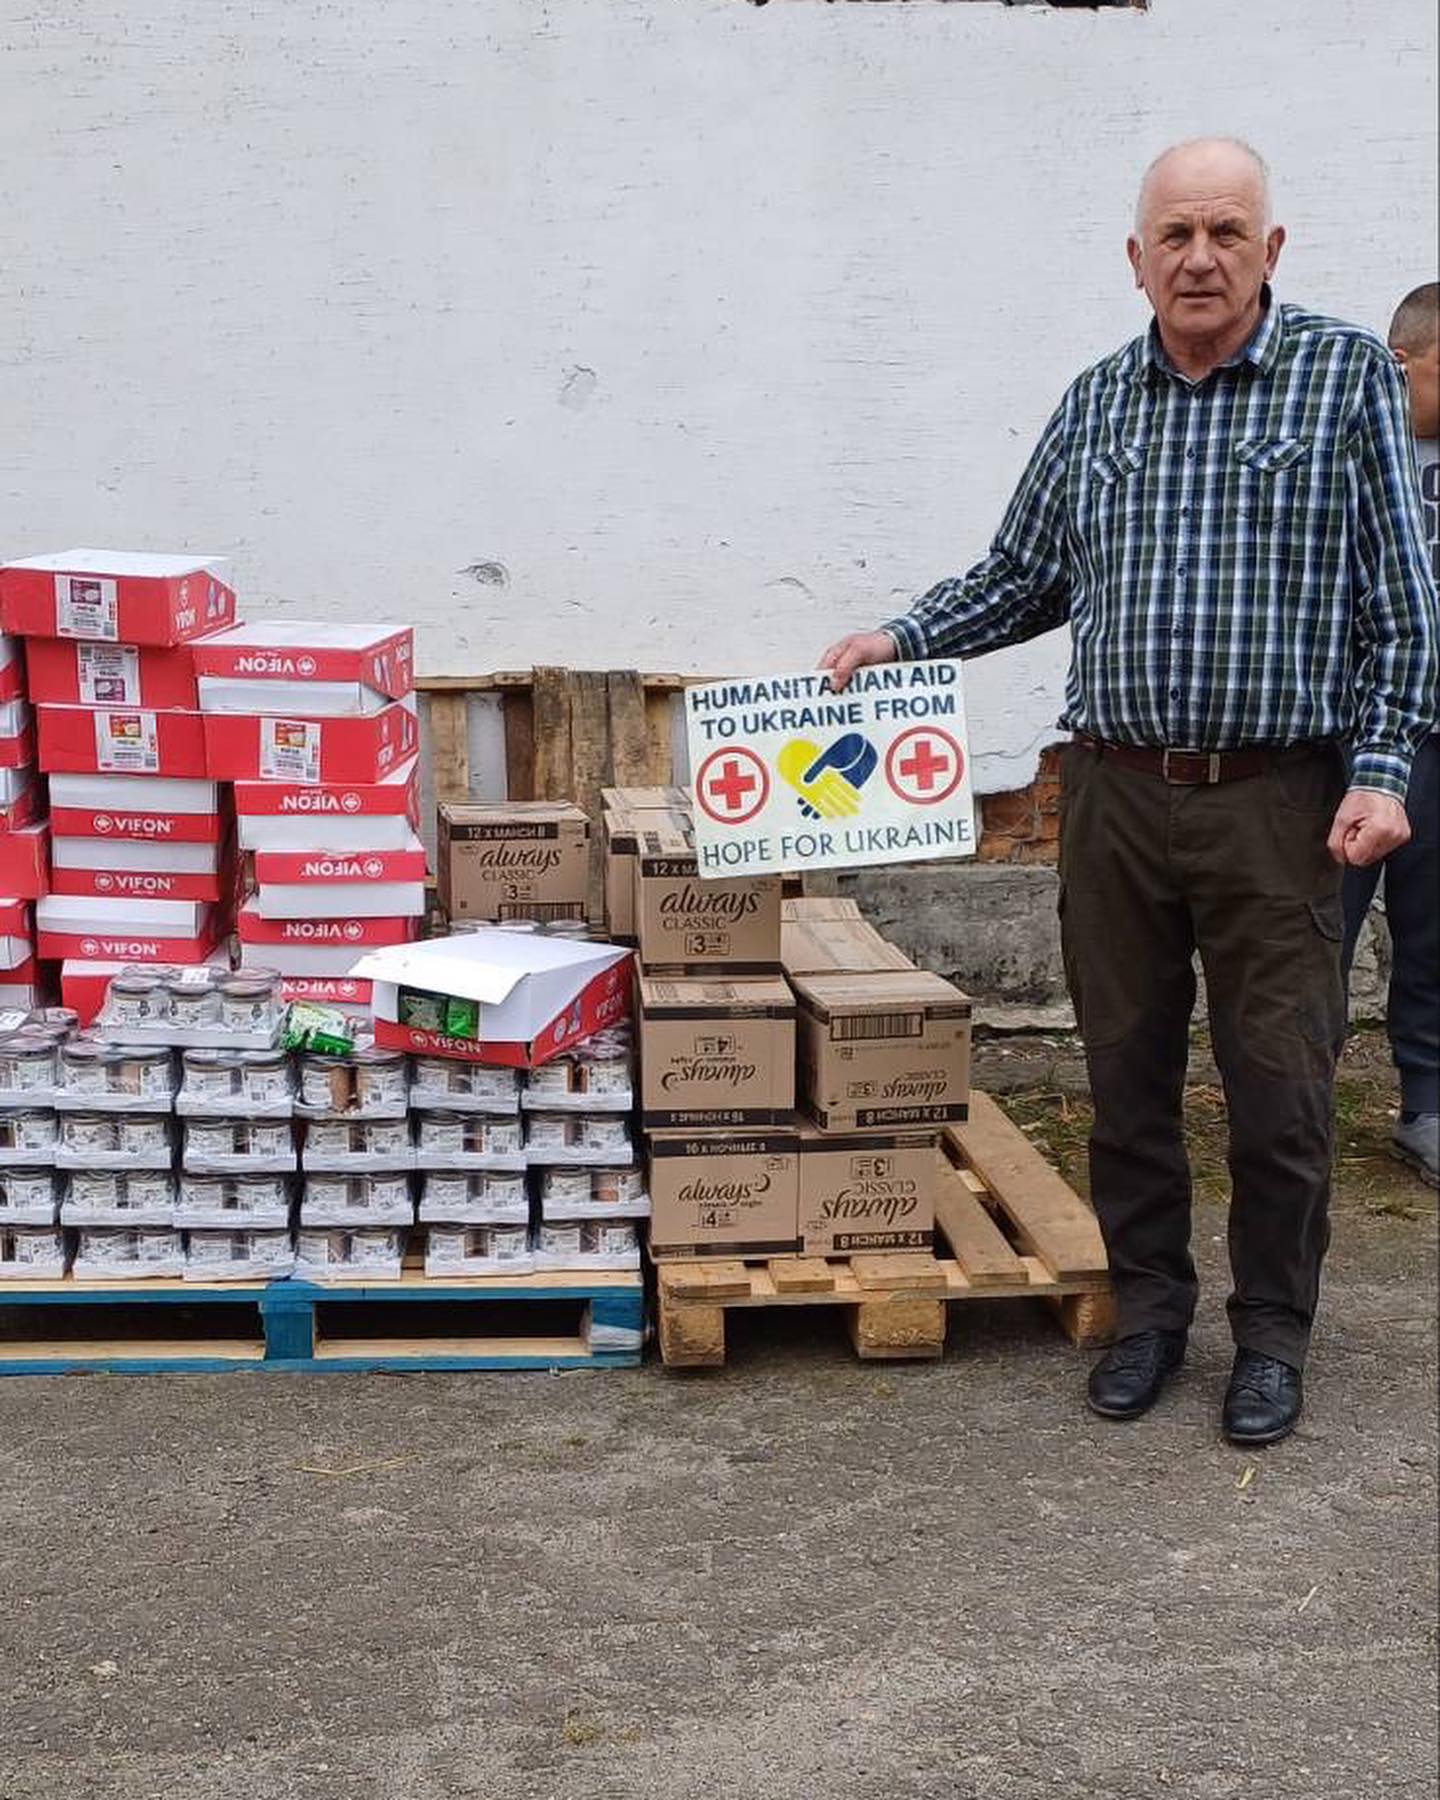 An elderly man standing beside boxes labeled "humanitarian aid to ukraine from hope for ukraine" and other supplies.